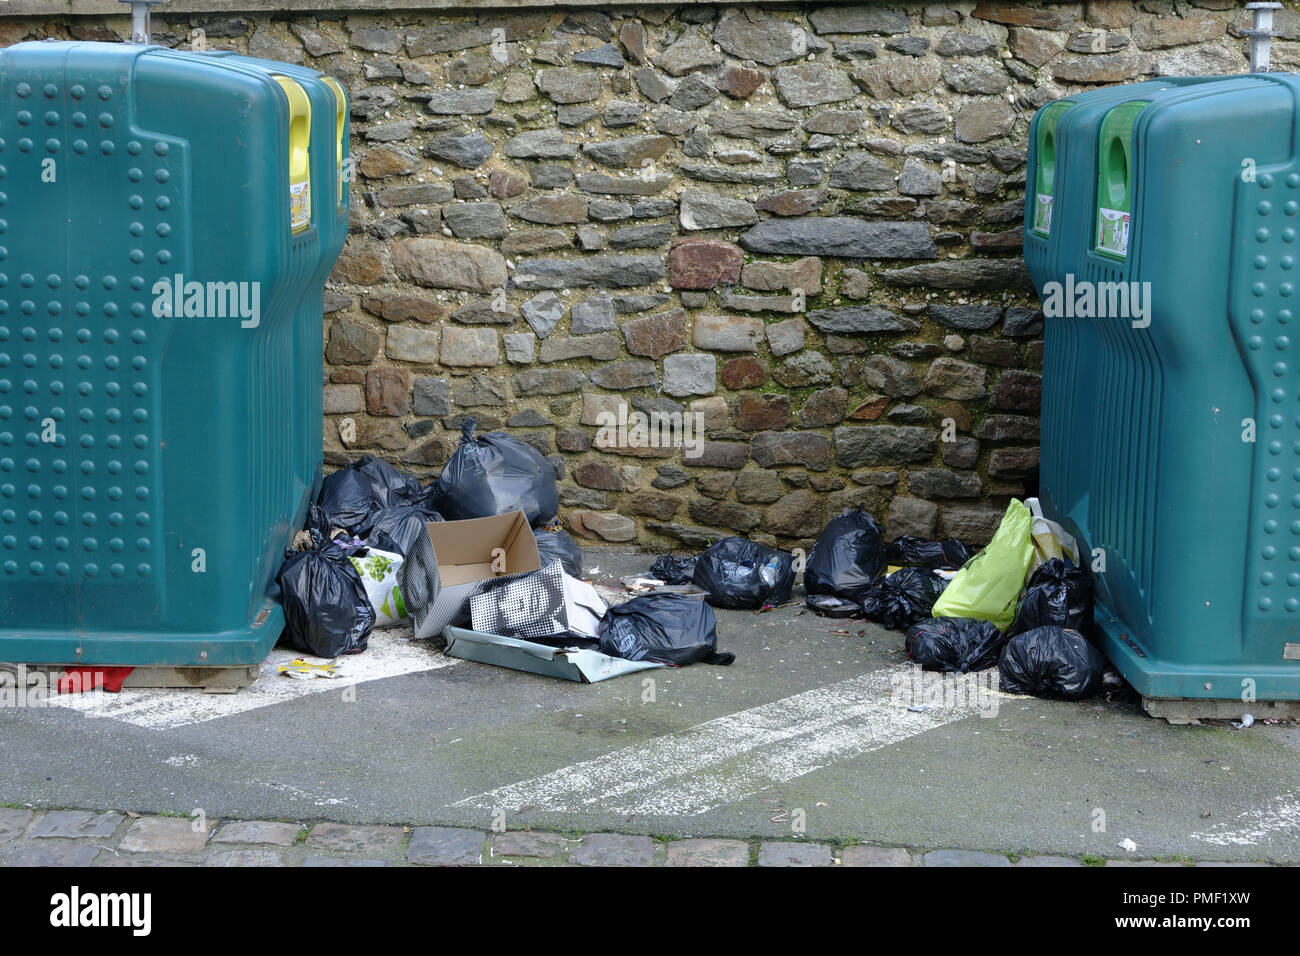 Garbage bags thrown at the bottom of containers for recycling waste, Mayenne city, Pays de la Loire, France Stock Photo